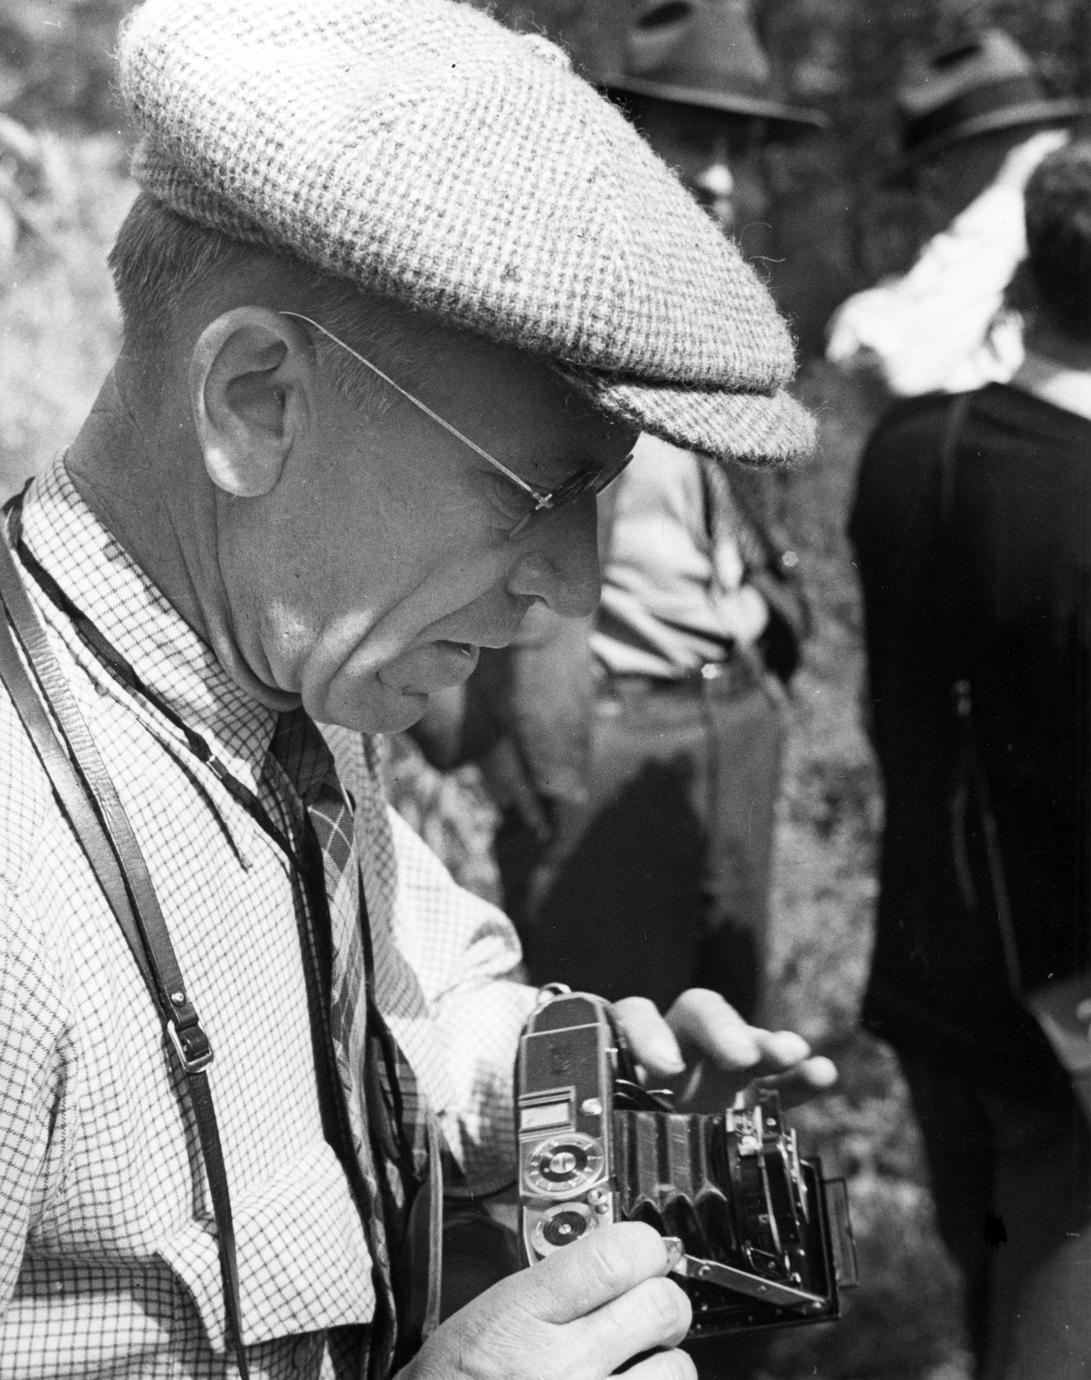 With camera, wearing tweed cap and looking down, 1935